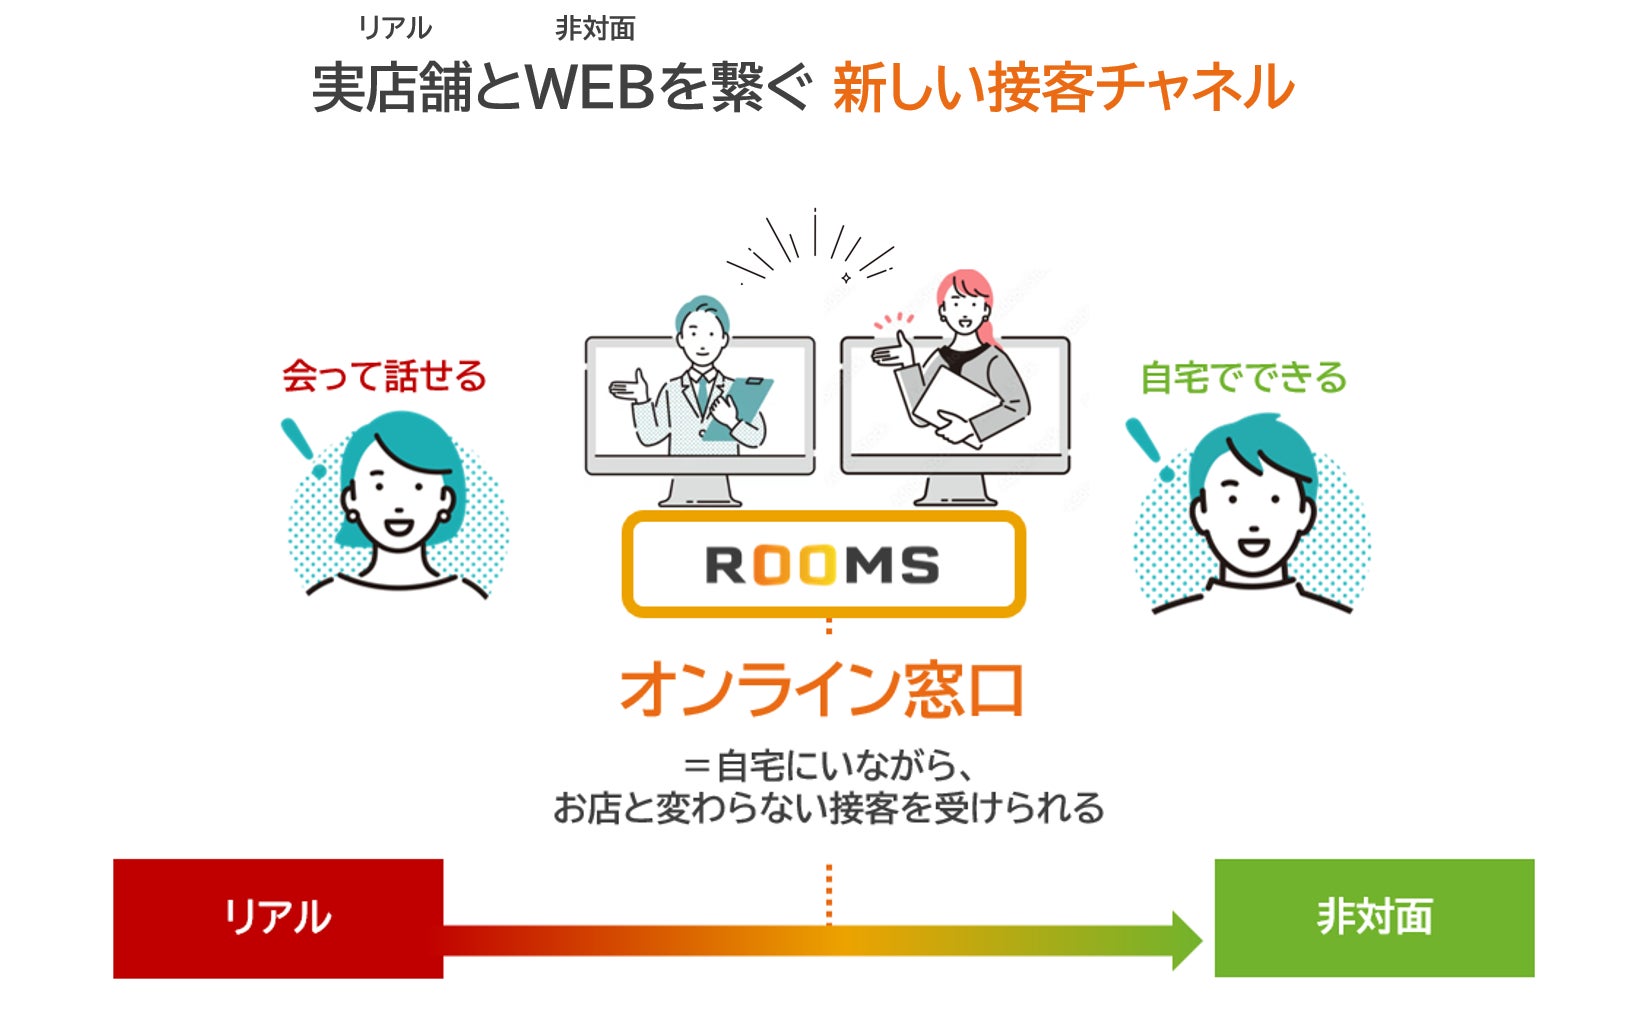 「ROOMS」が2期連続で”最高満足度評価”を獲得。ITreview主催「Grid Award 2023 Spring」にて、オンライン商談部門で“High Performer”受賞。のサブ画像7